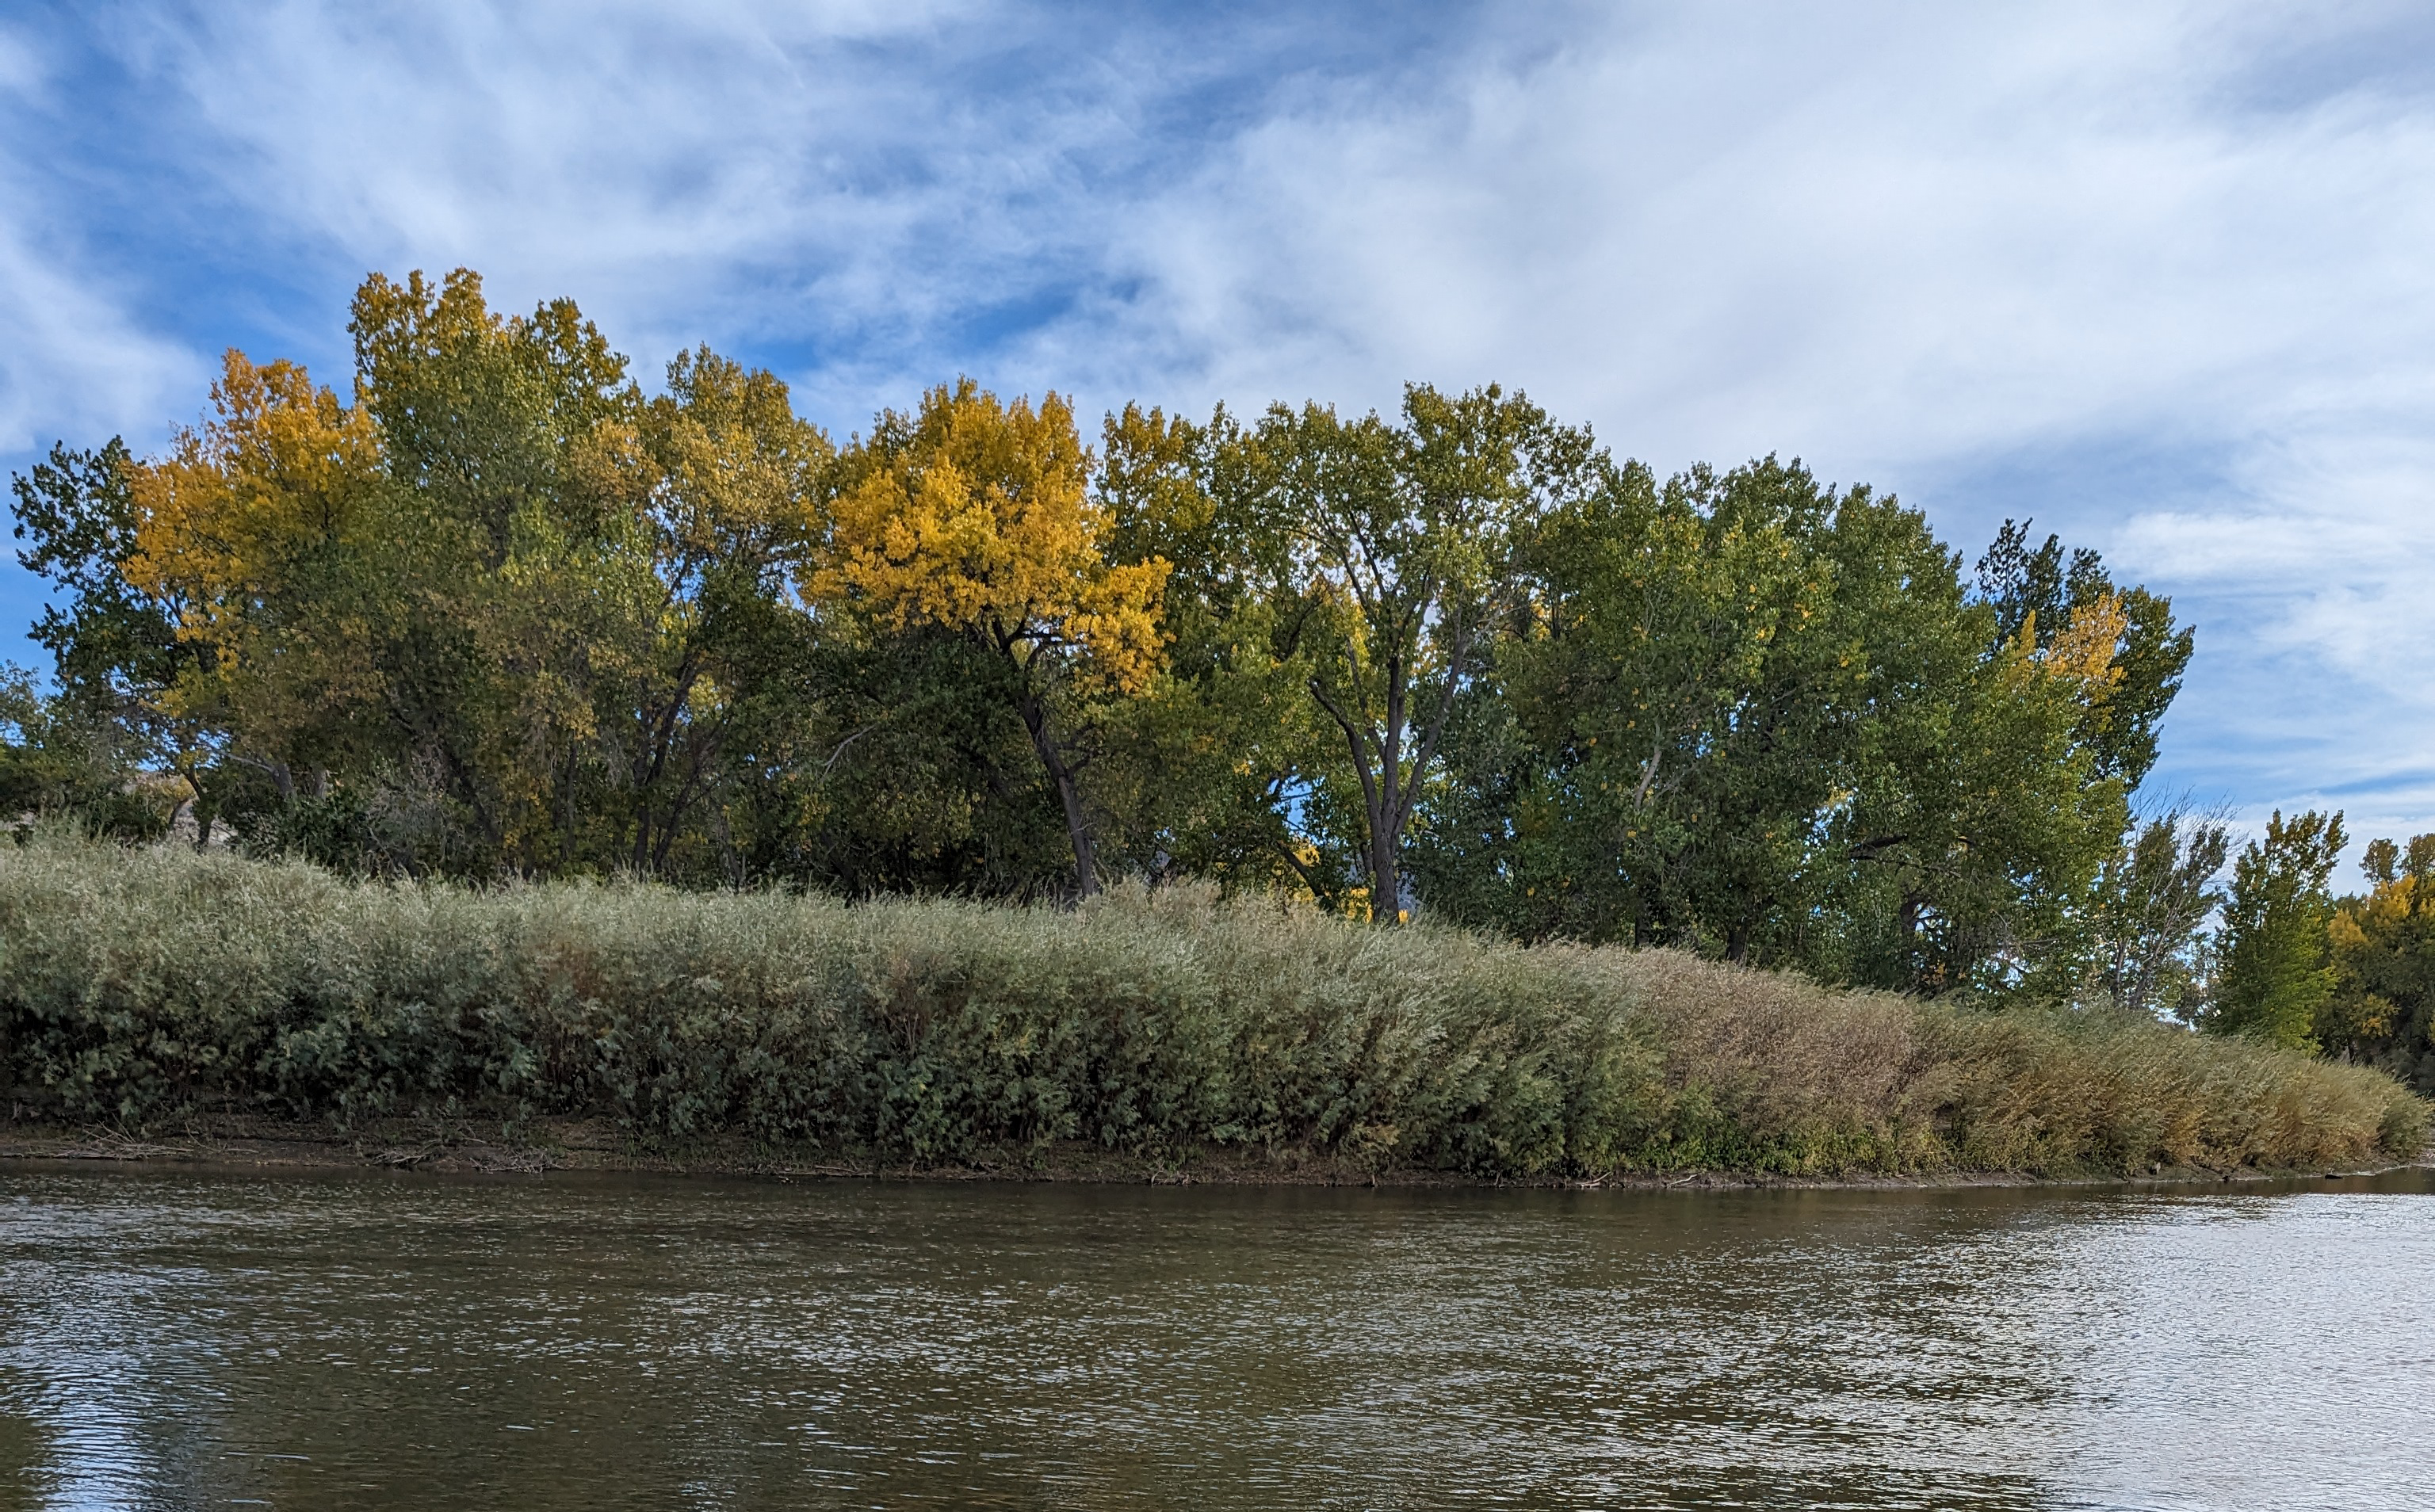 Photograph of elm trees turing orange for fall on the far side of a river bank 